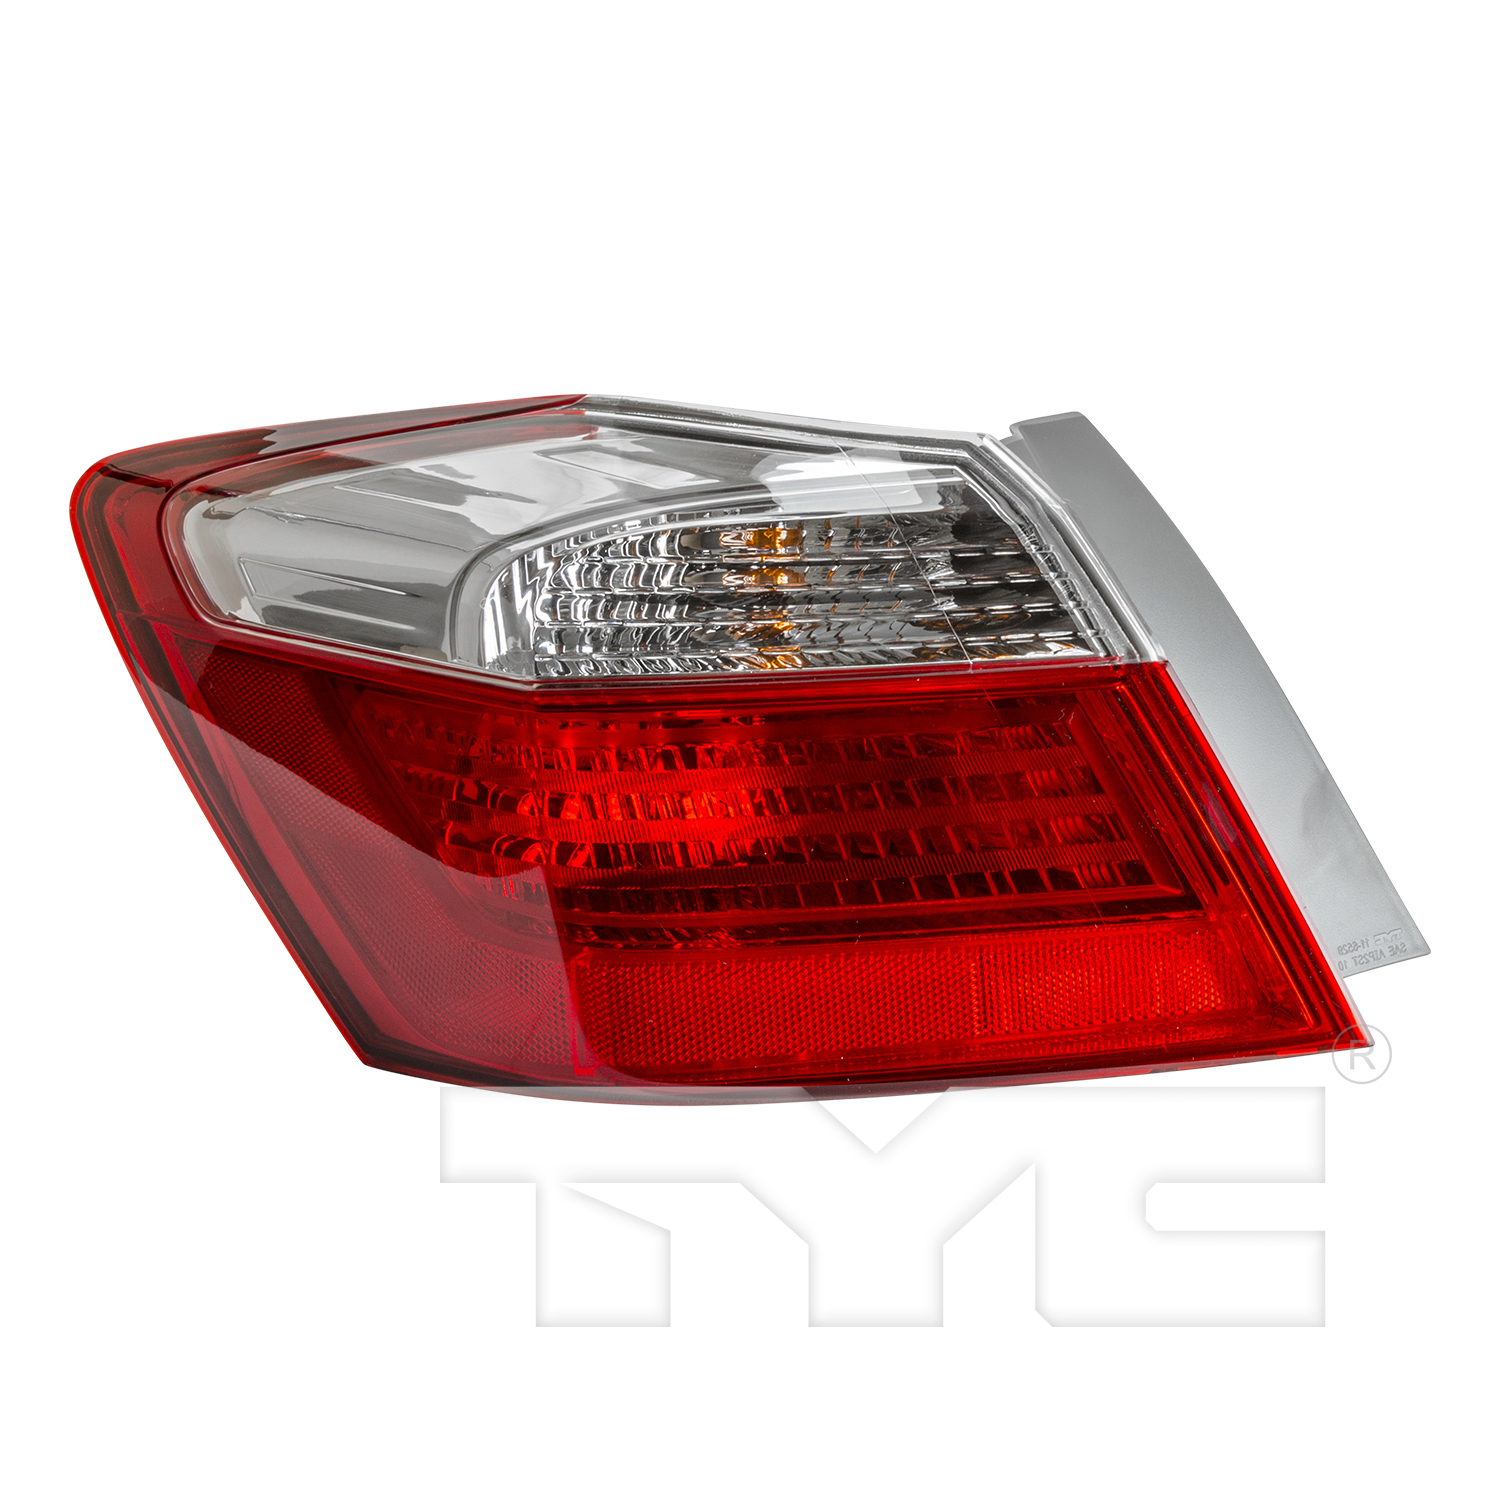 Aftermarket TAILLIGHTS for HONDA - ACCORD, ACCORD,13-15,LT Taillamp assy outer